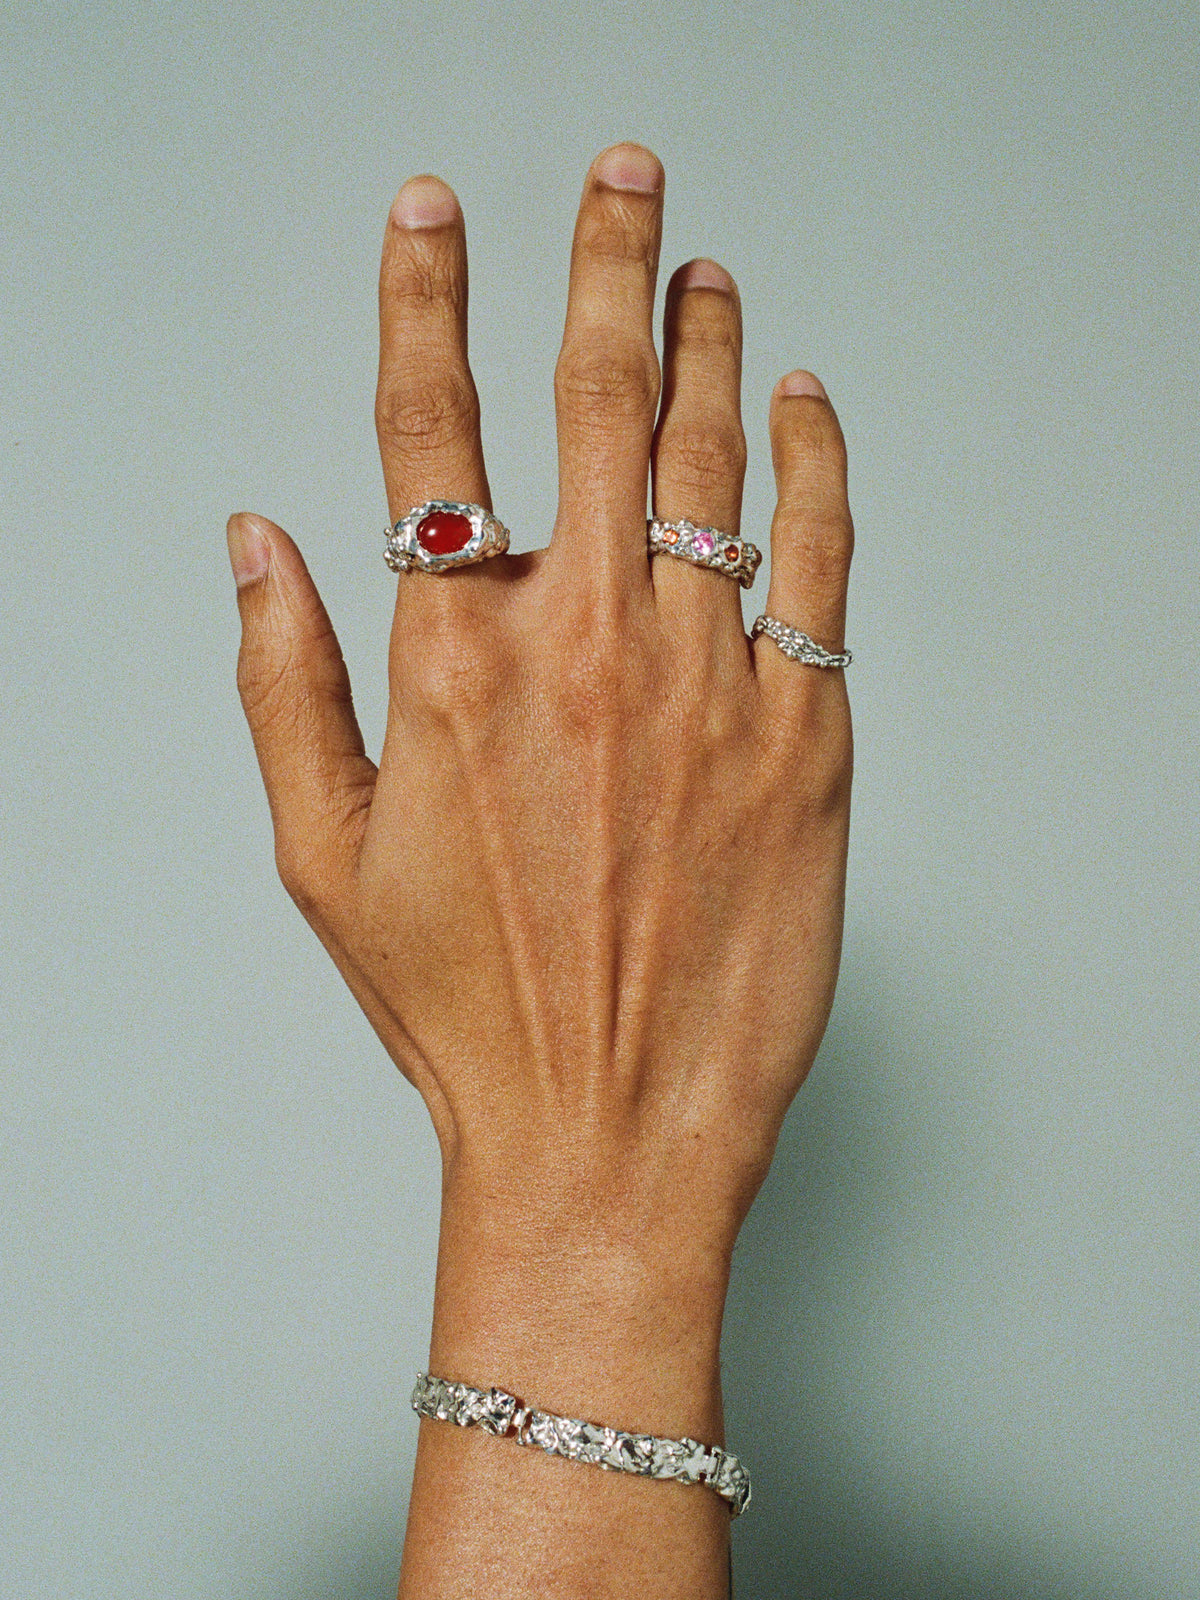 FARIS ROCA EYE Ring in sterling silver with carnelian worn on model. Styled with ROCA GEM Band in sterling silver with lab-created pink and orange sapphire, ROCA WAVE Ring in sterling silver, and BRUTO Bracelet in silver